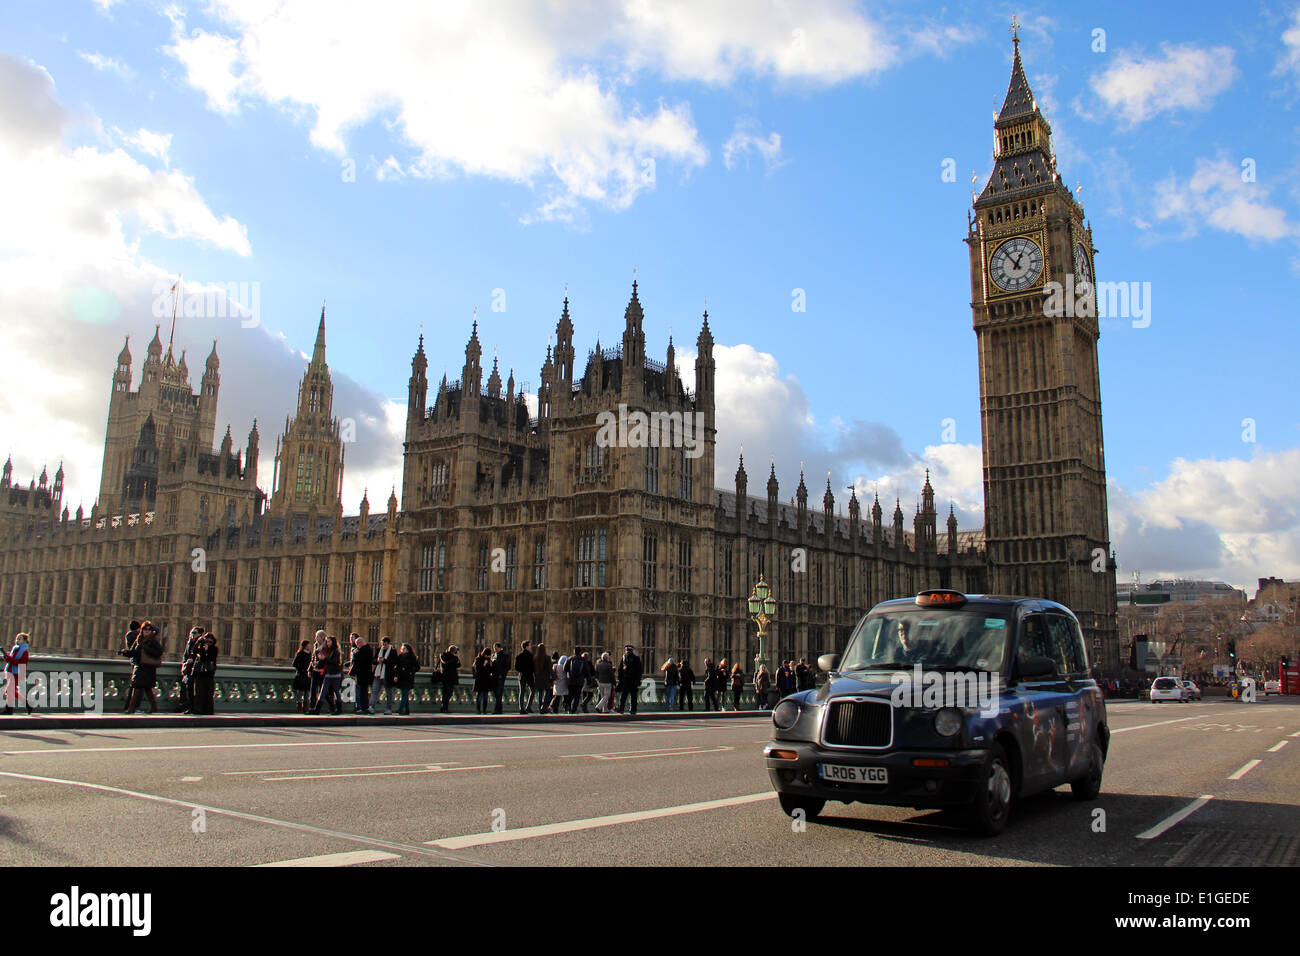 London: Palace of Westminster with Big Ben (Elizabeth Tower) , 2014/01/11 Stock Photo